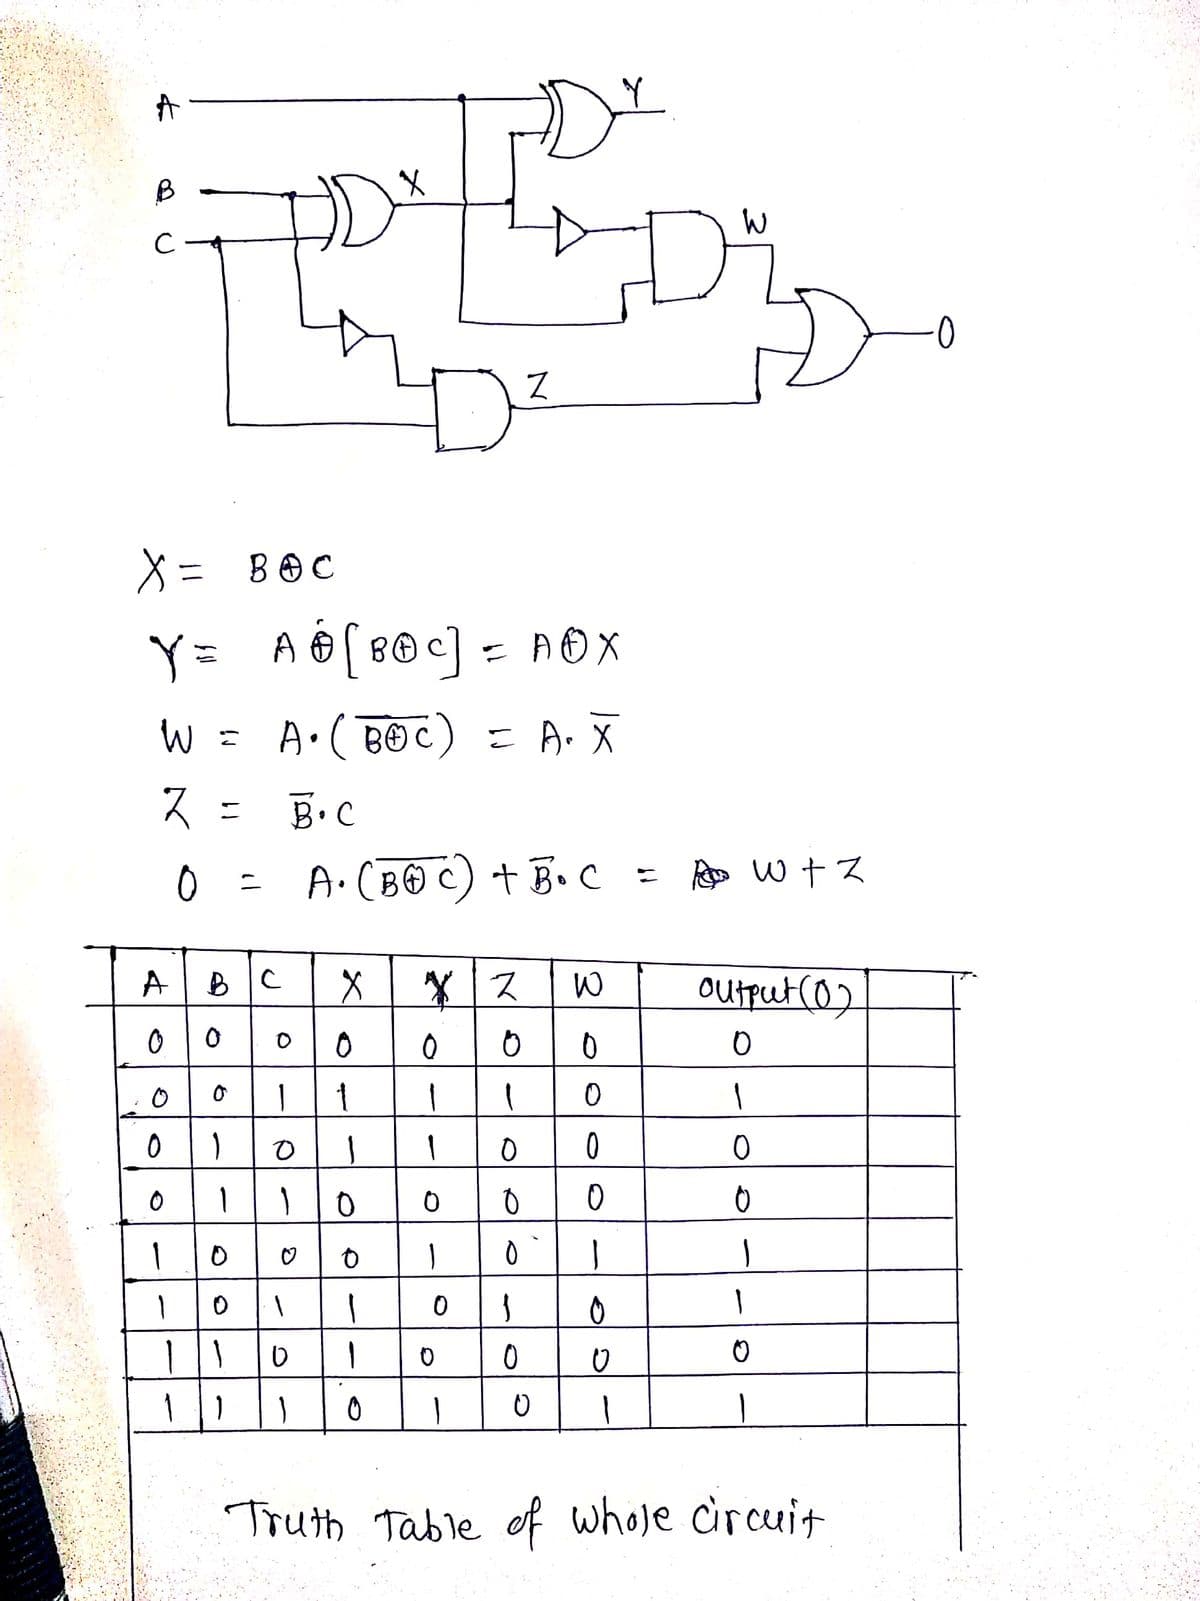 B
0-
D²
% =
BOC
Y=
A 6 [ 80 ] = AOX
W = A.(BO c) = A. X
Z = B.C
A. (BO C) + B.C = W +2
A
outfut (0)
to
Truth Table ef whole circuit
